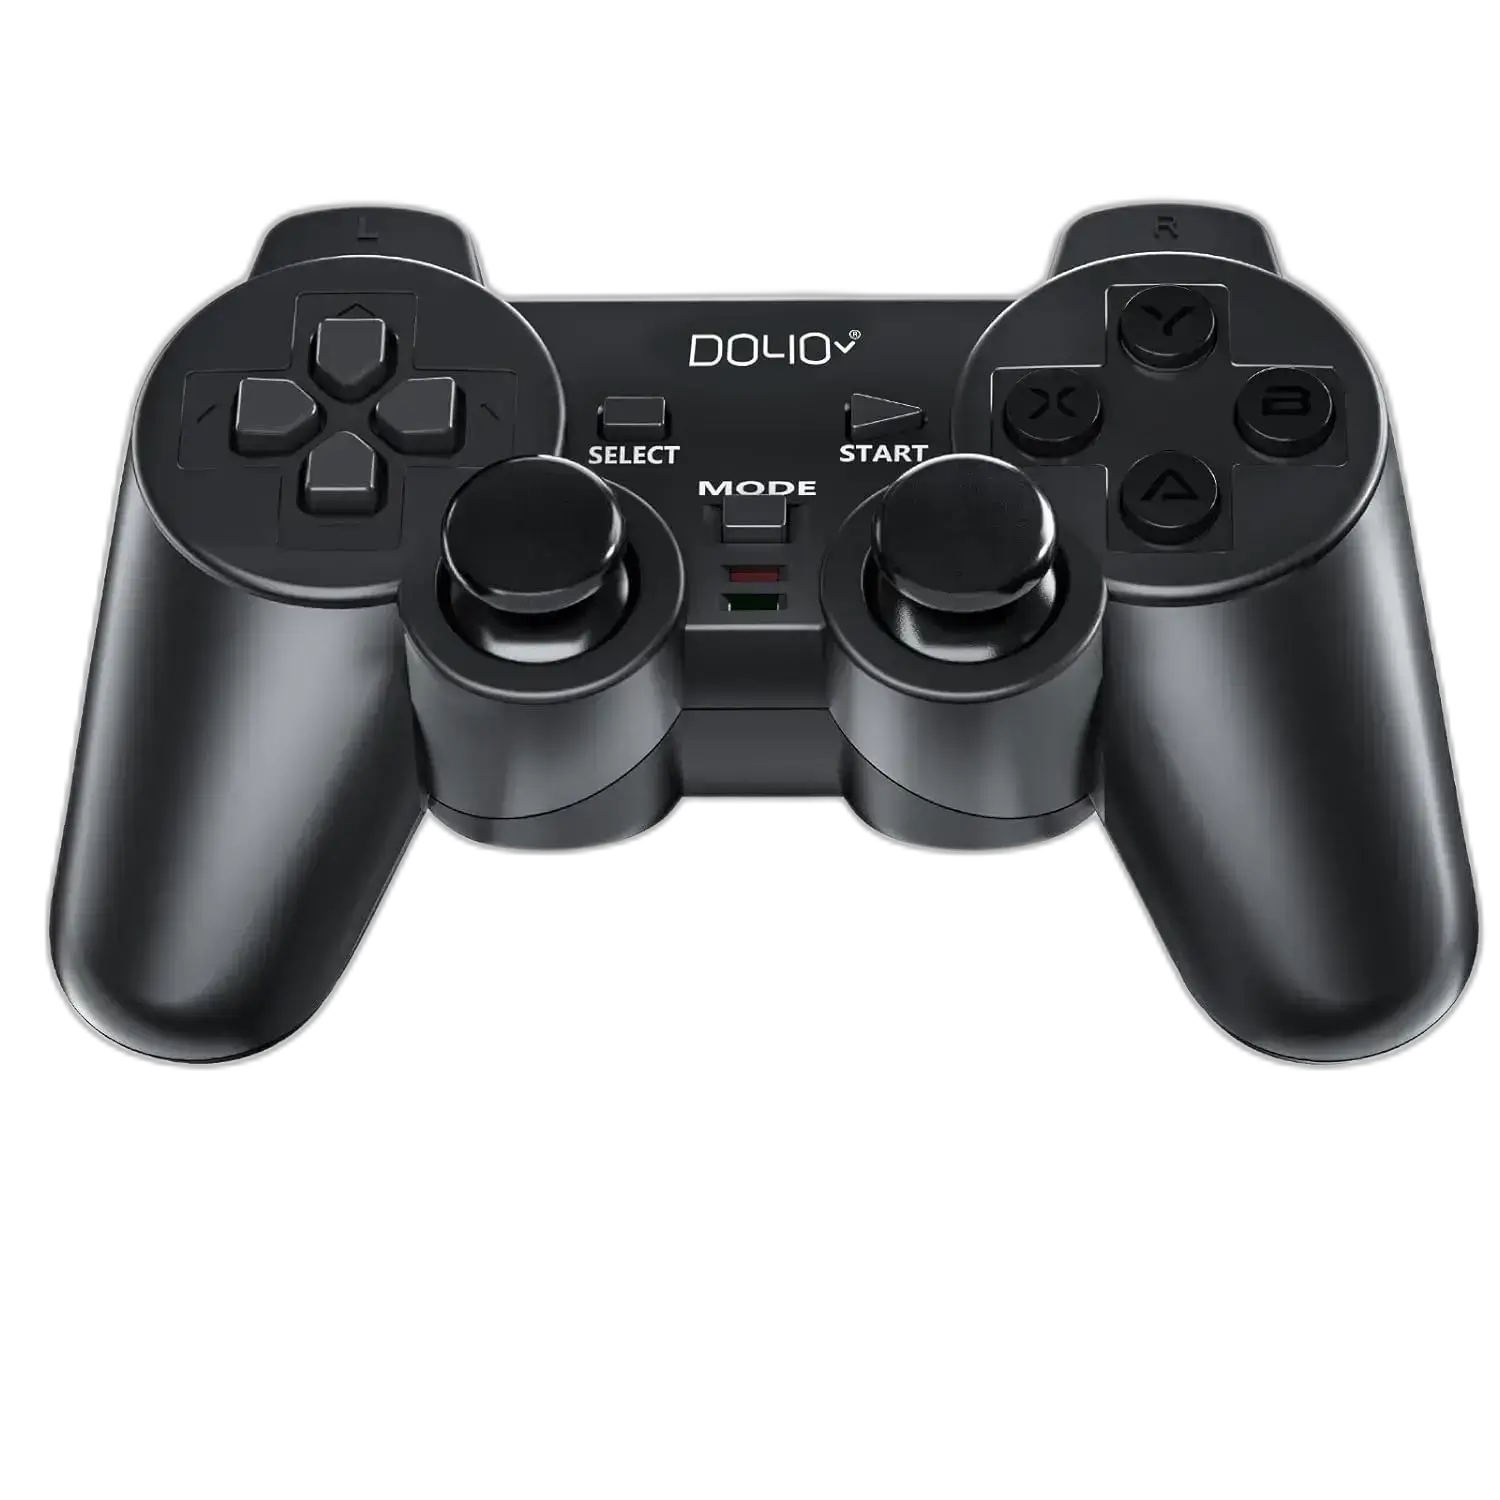 DOYO Wireless PC Gaming Controller - Runner up in wireless controller